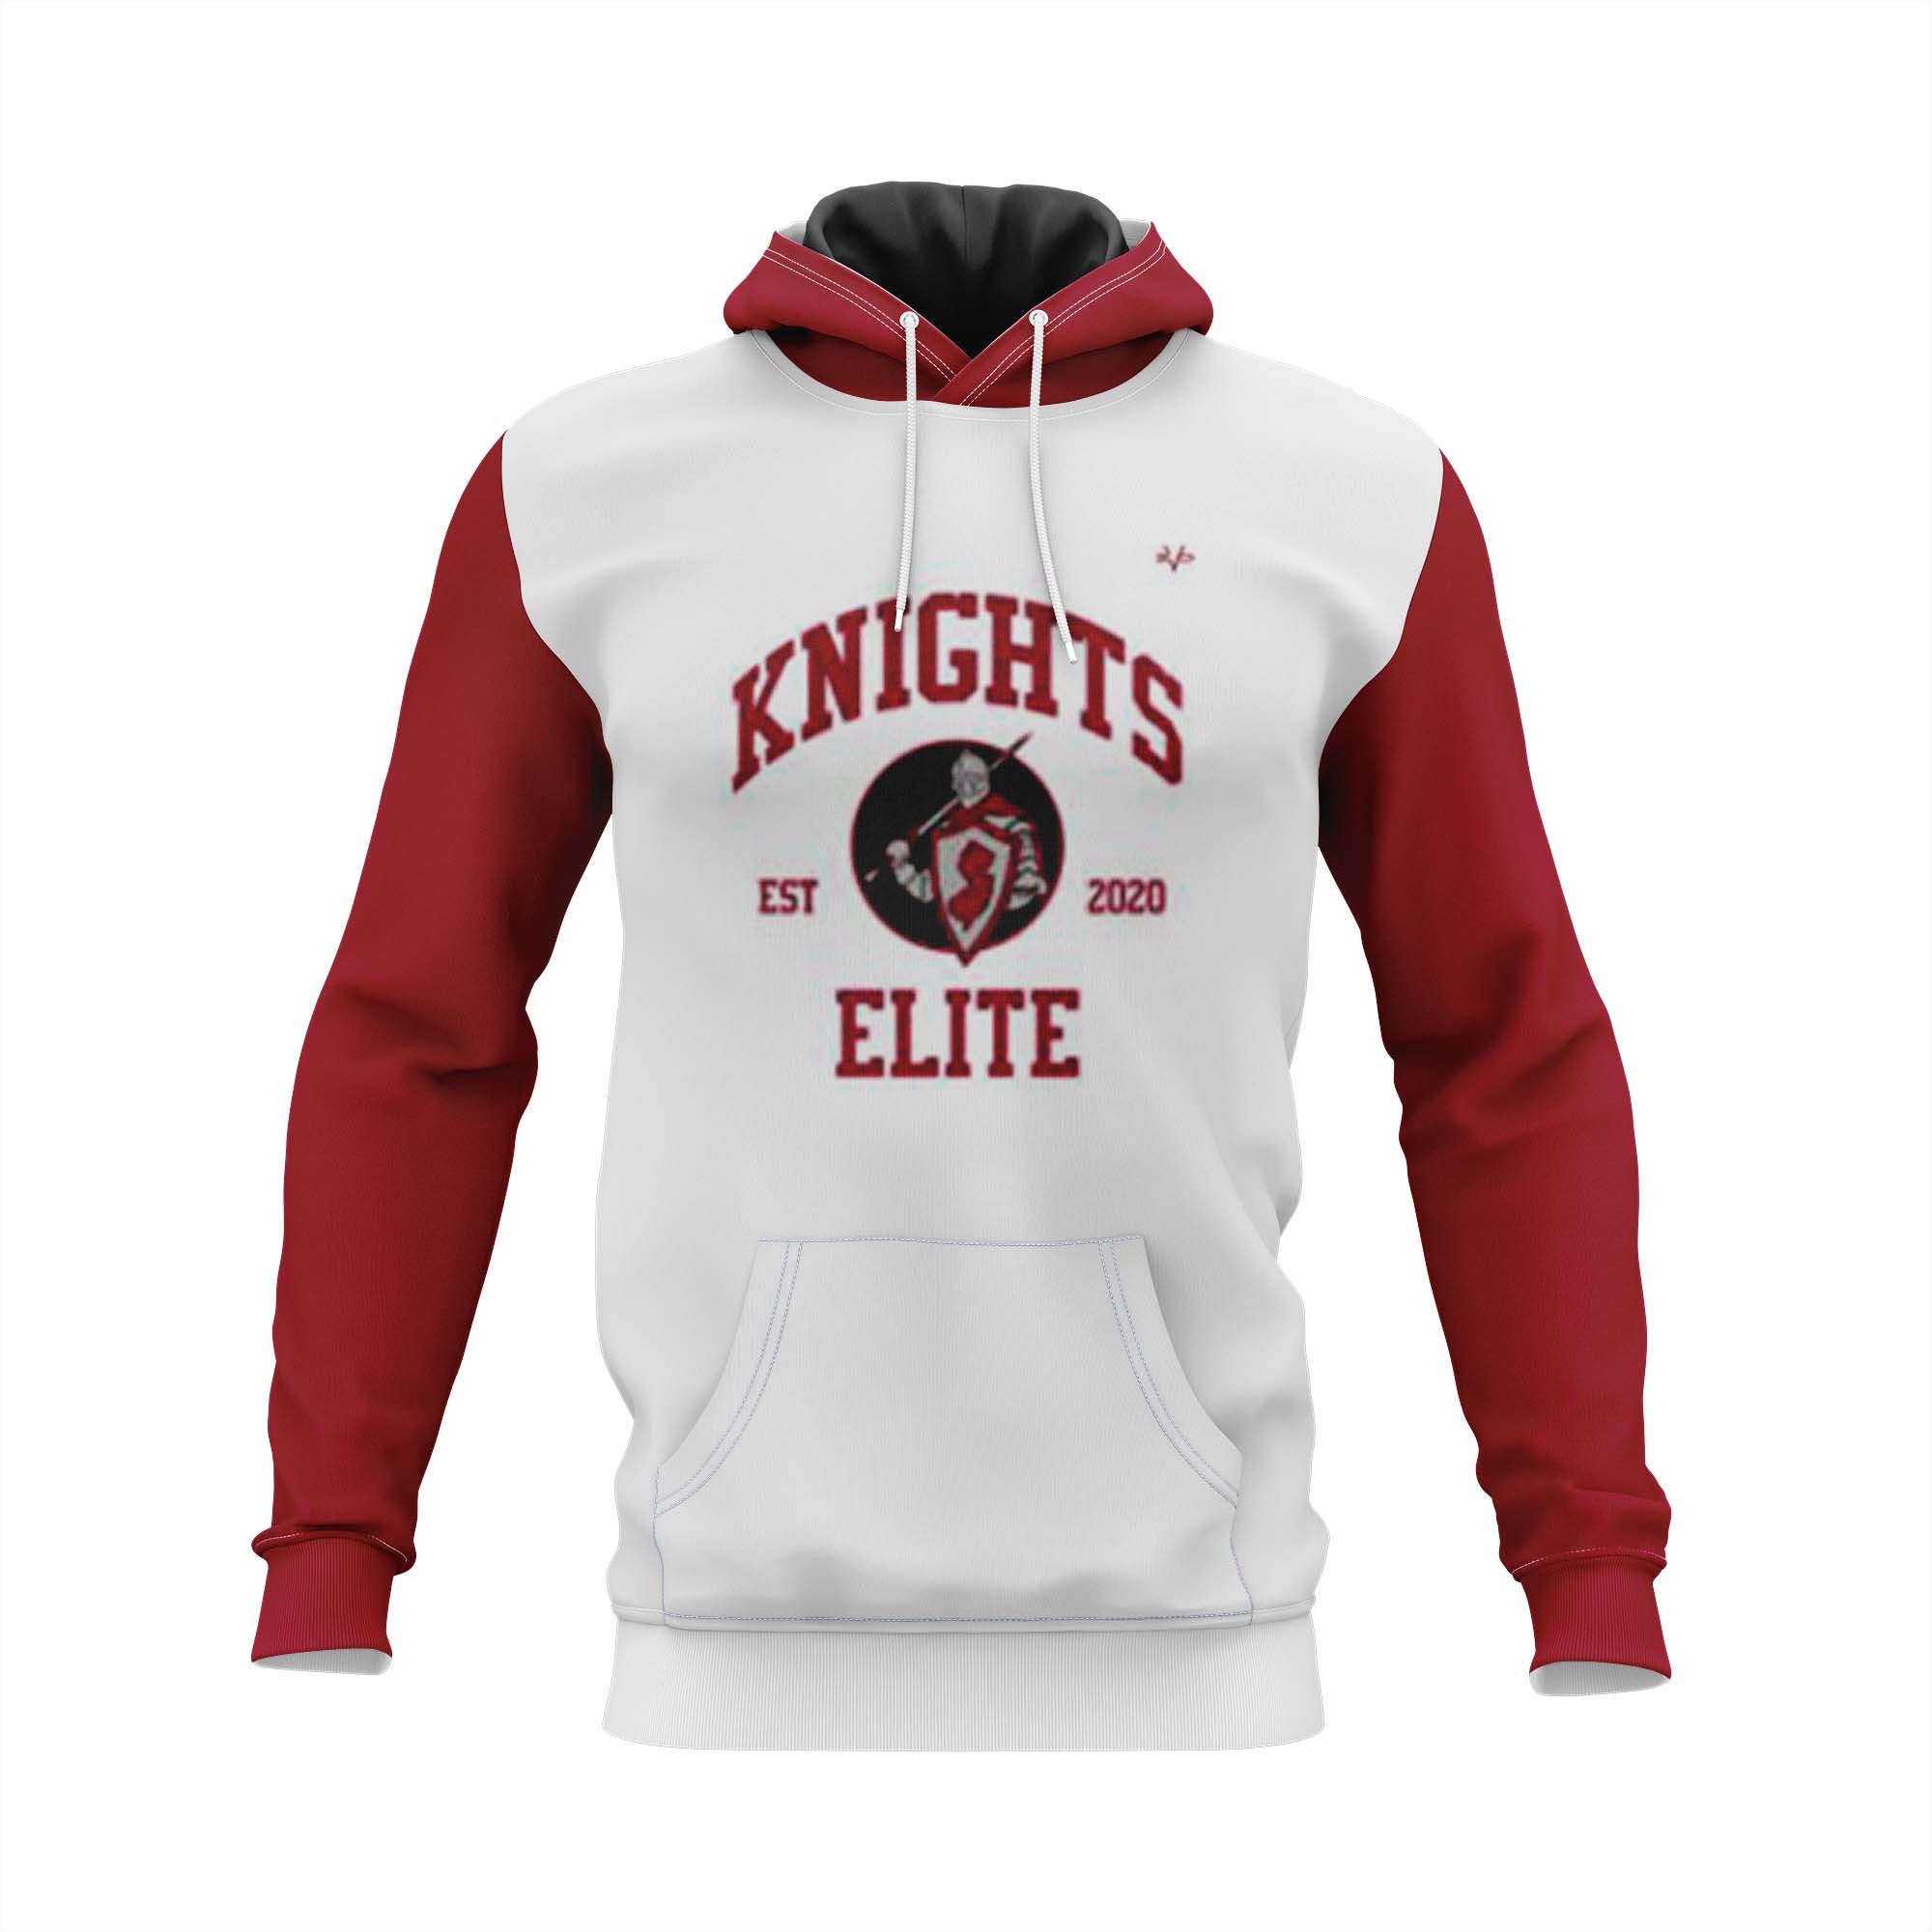 KNIGHTS ELITE Football Sublimated Hoodie Black White/Red